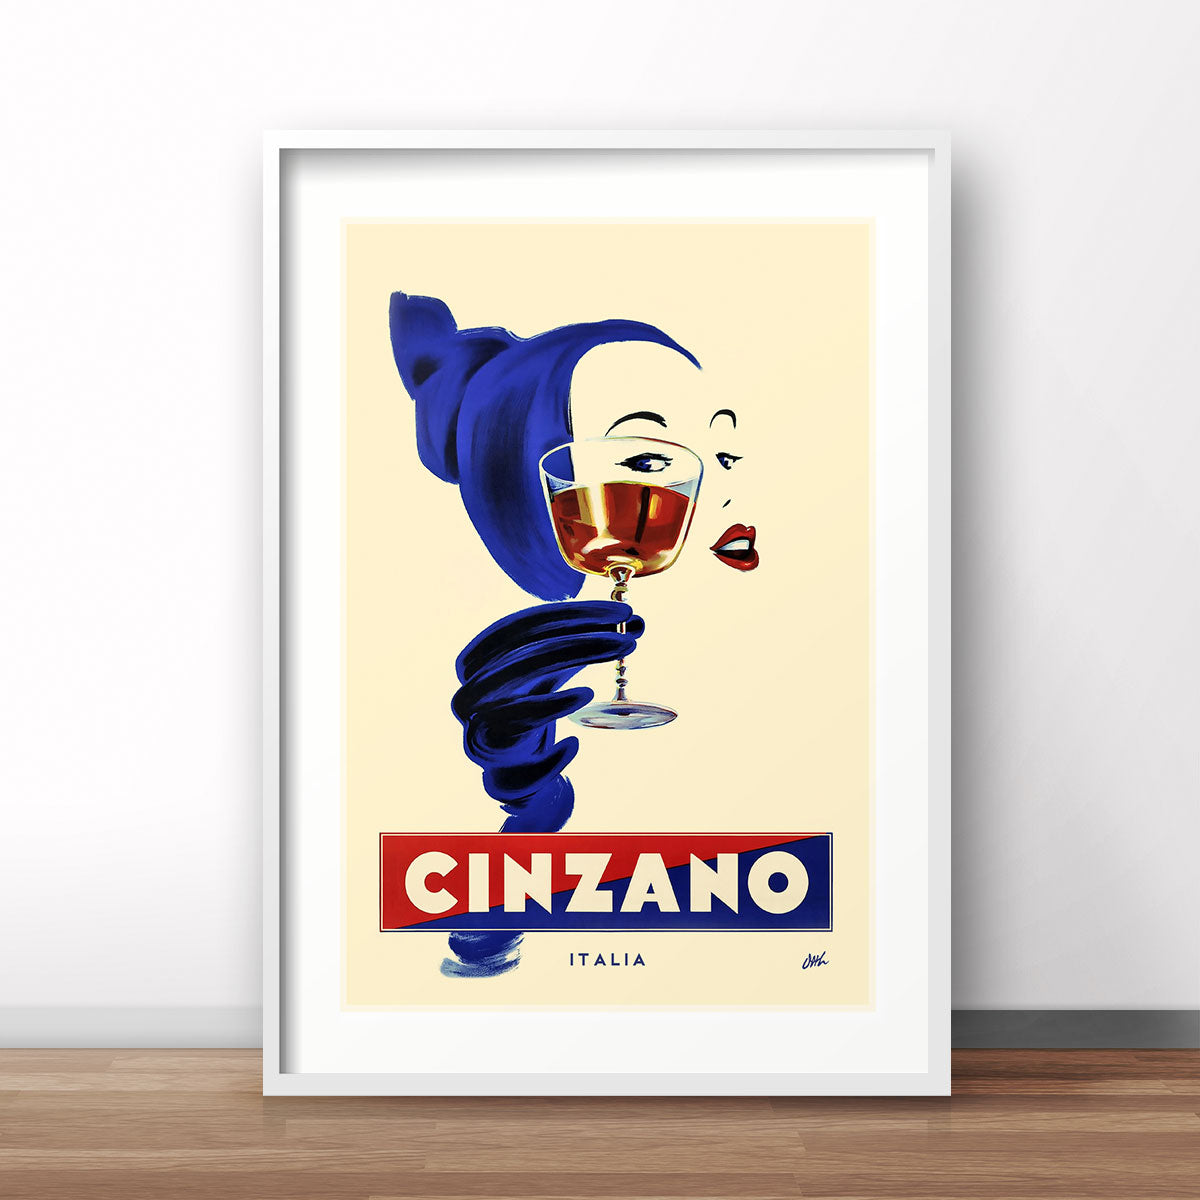 Cinzano retro vintage advertising poster or framed print Italy from Places We Luv